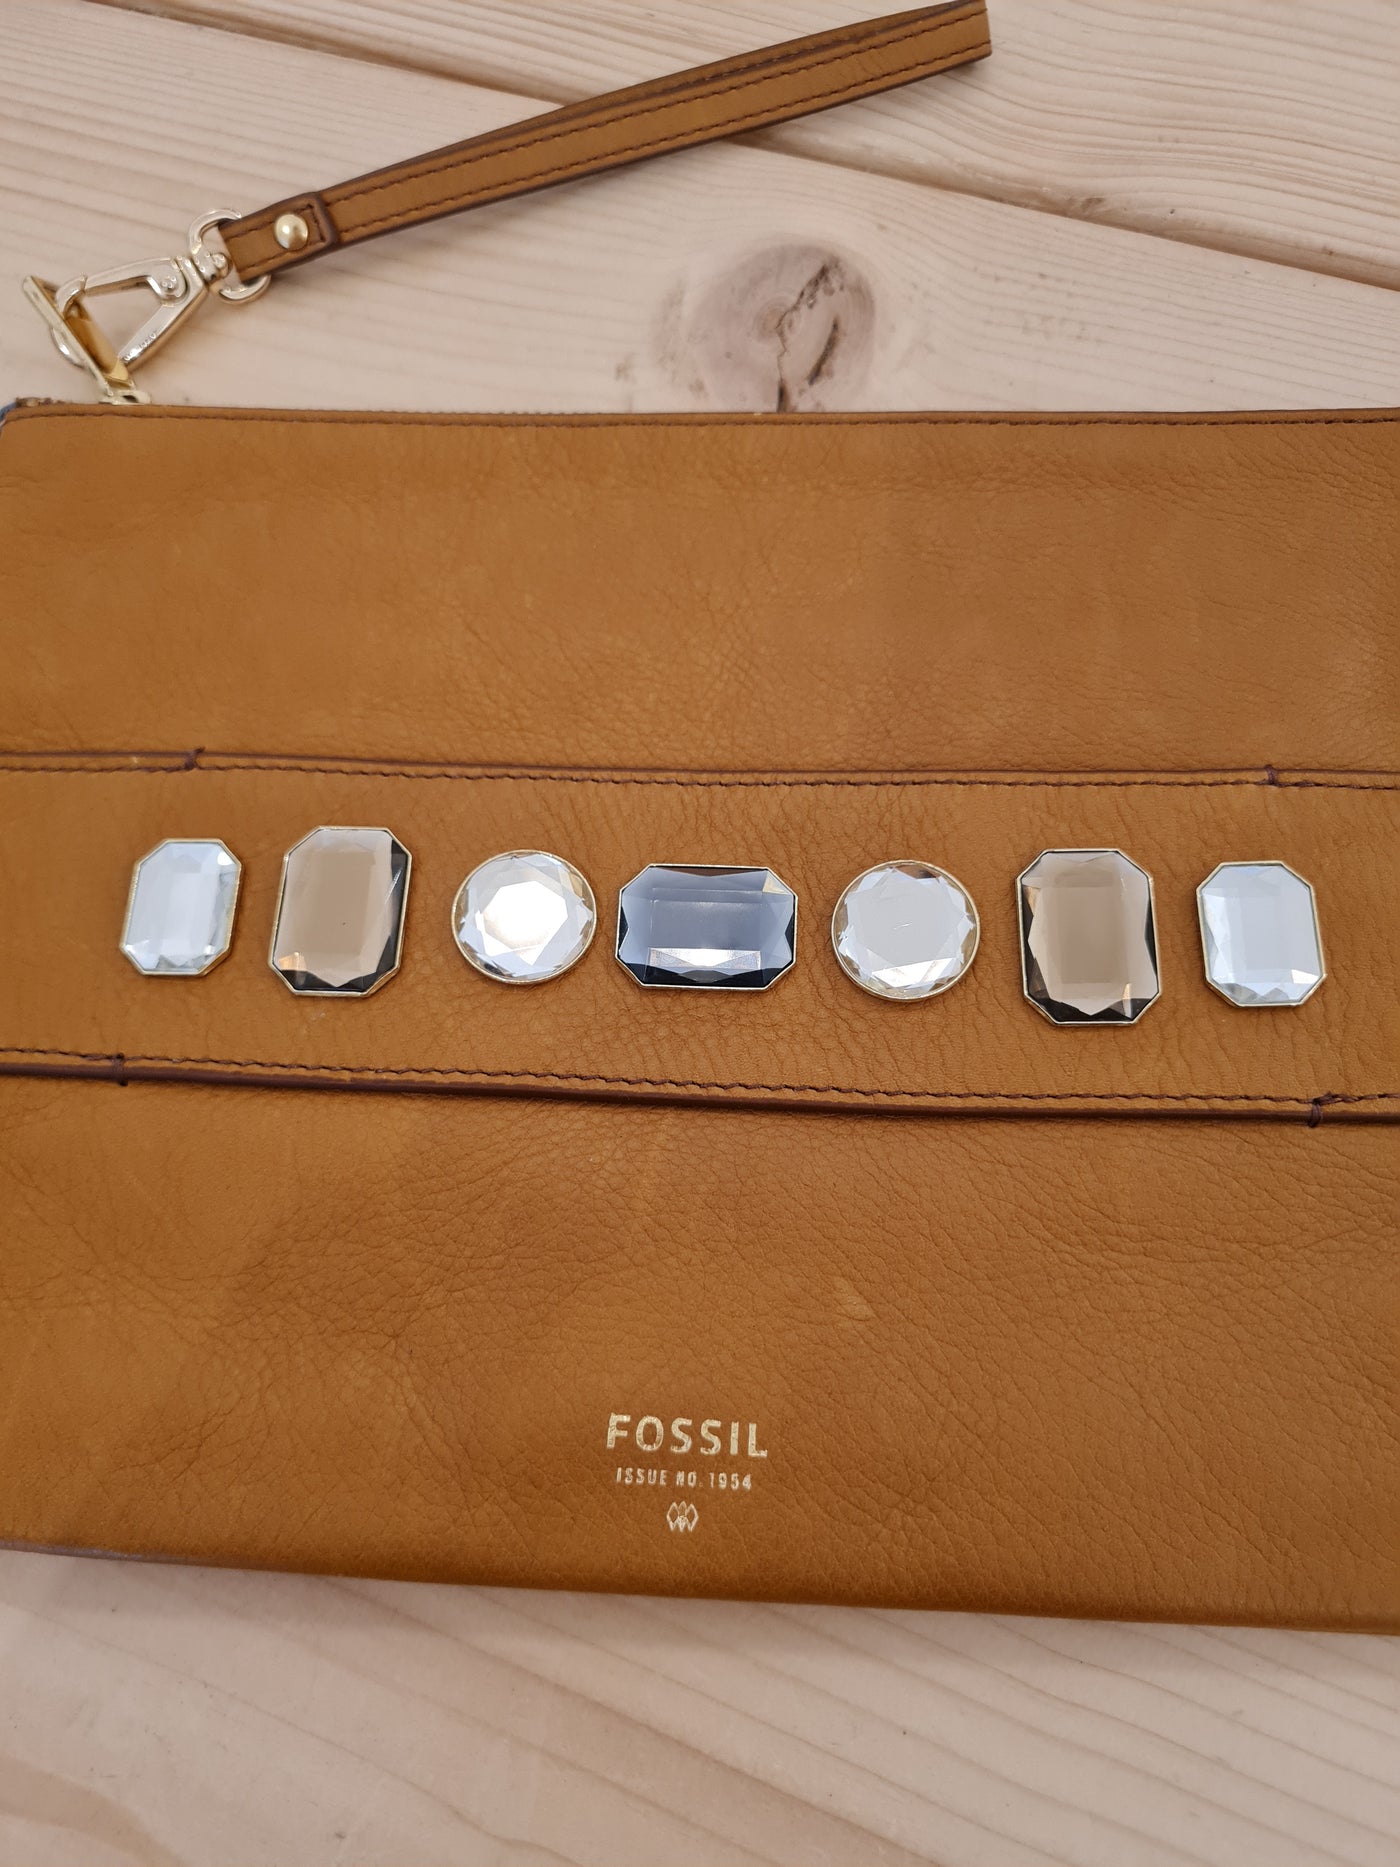 Fossil tan leather jewelled clutch NWT